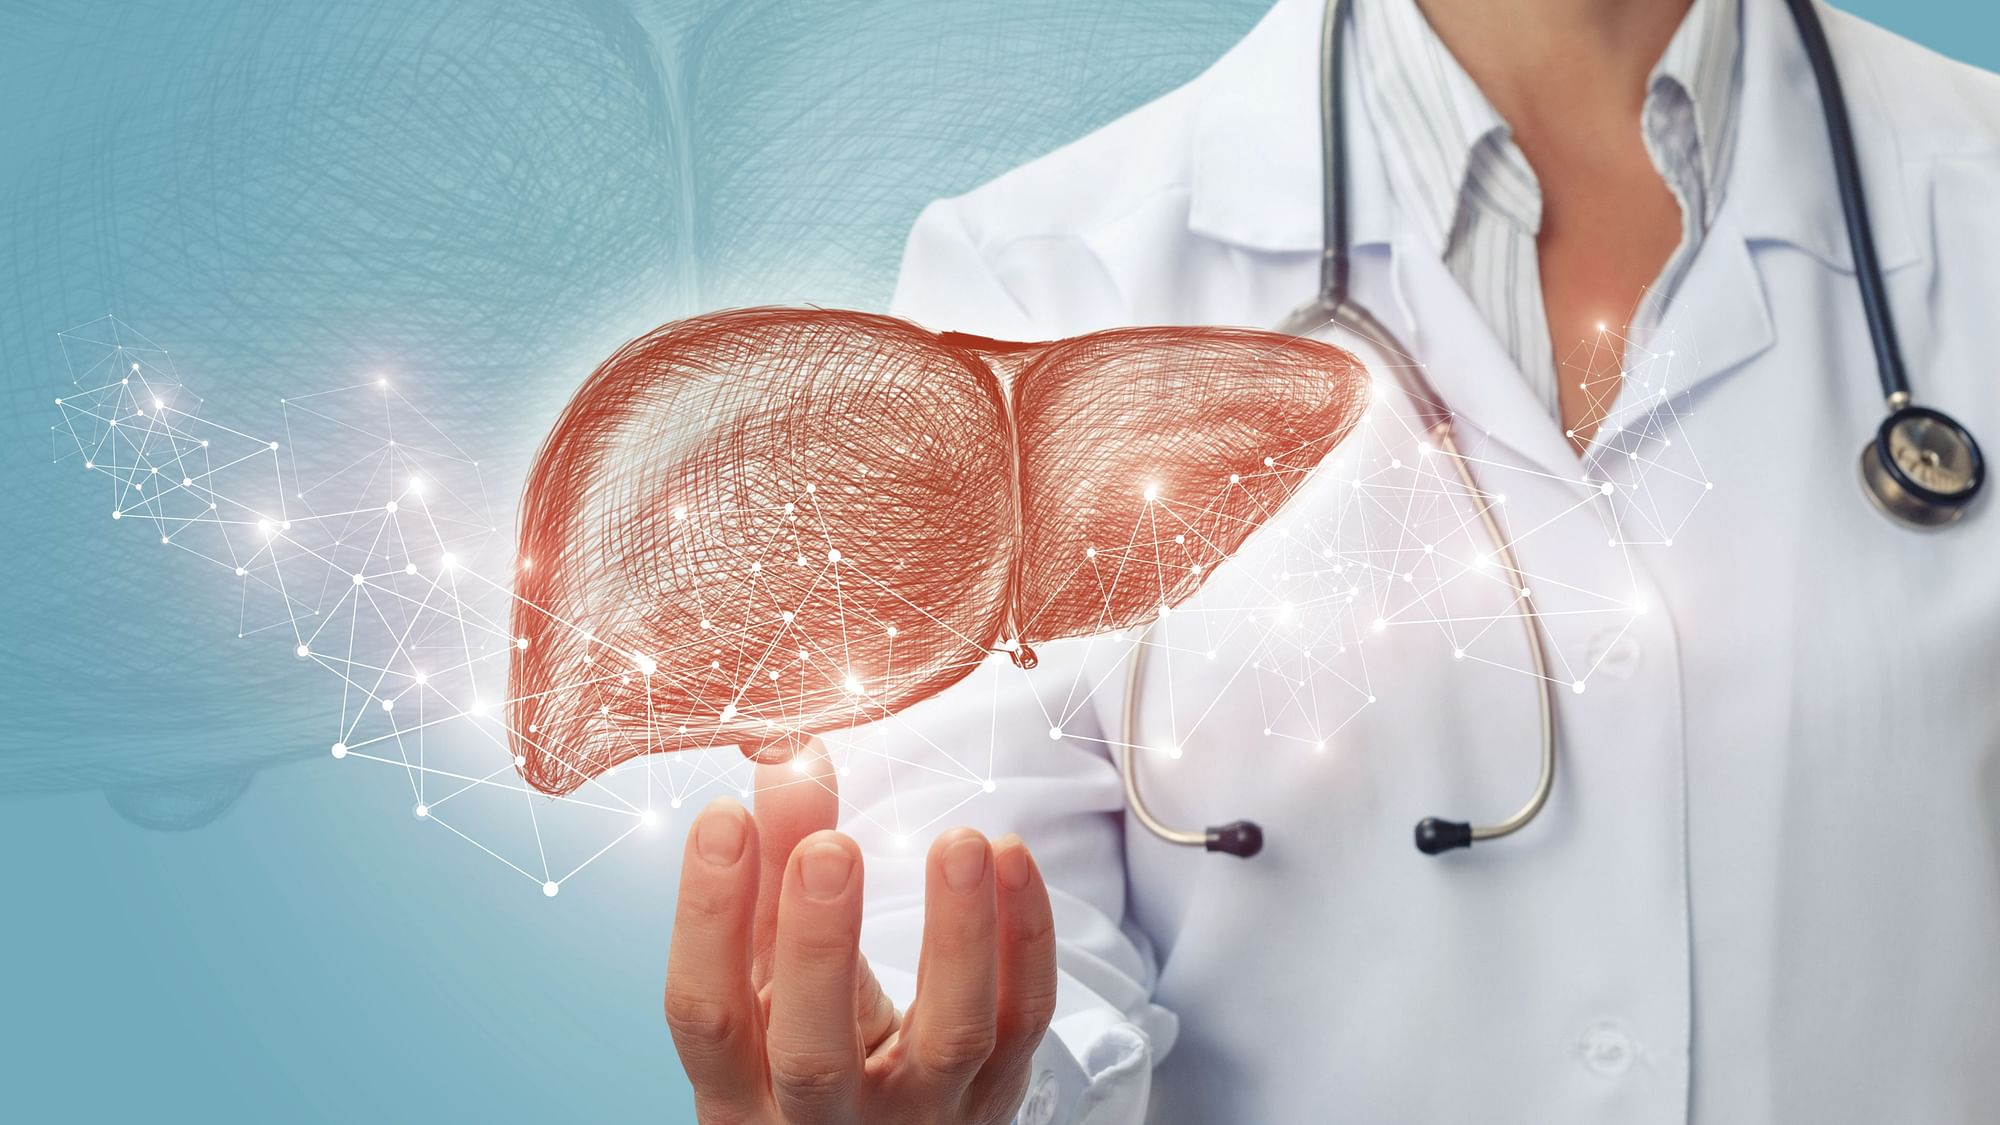 Researchers identified a new type of cell that may be able to regenerate liver tissue and treat liver failure.